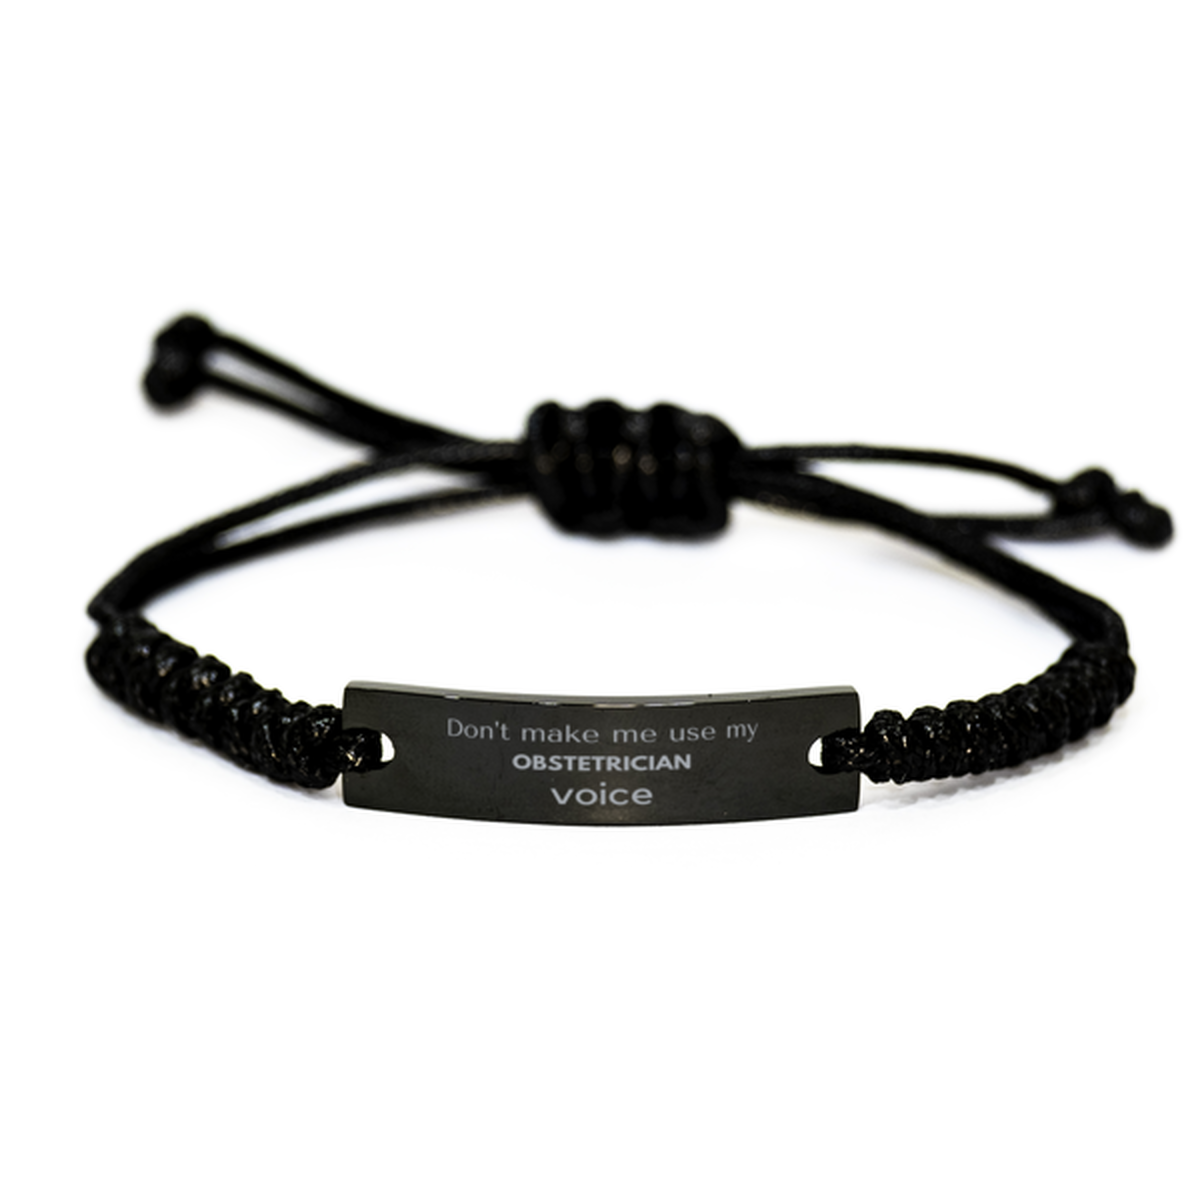 Don't make me use my Obstetrician voice, Sarcasm Obstetrician Gifts, Christmas Obstetrician Black Rope Bracelet Birthday Unique Gifts For Obstetrician Coworkers, Men, Women, Colleague, Friends